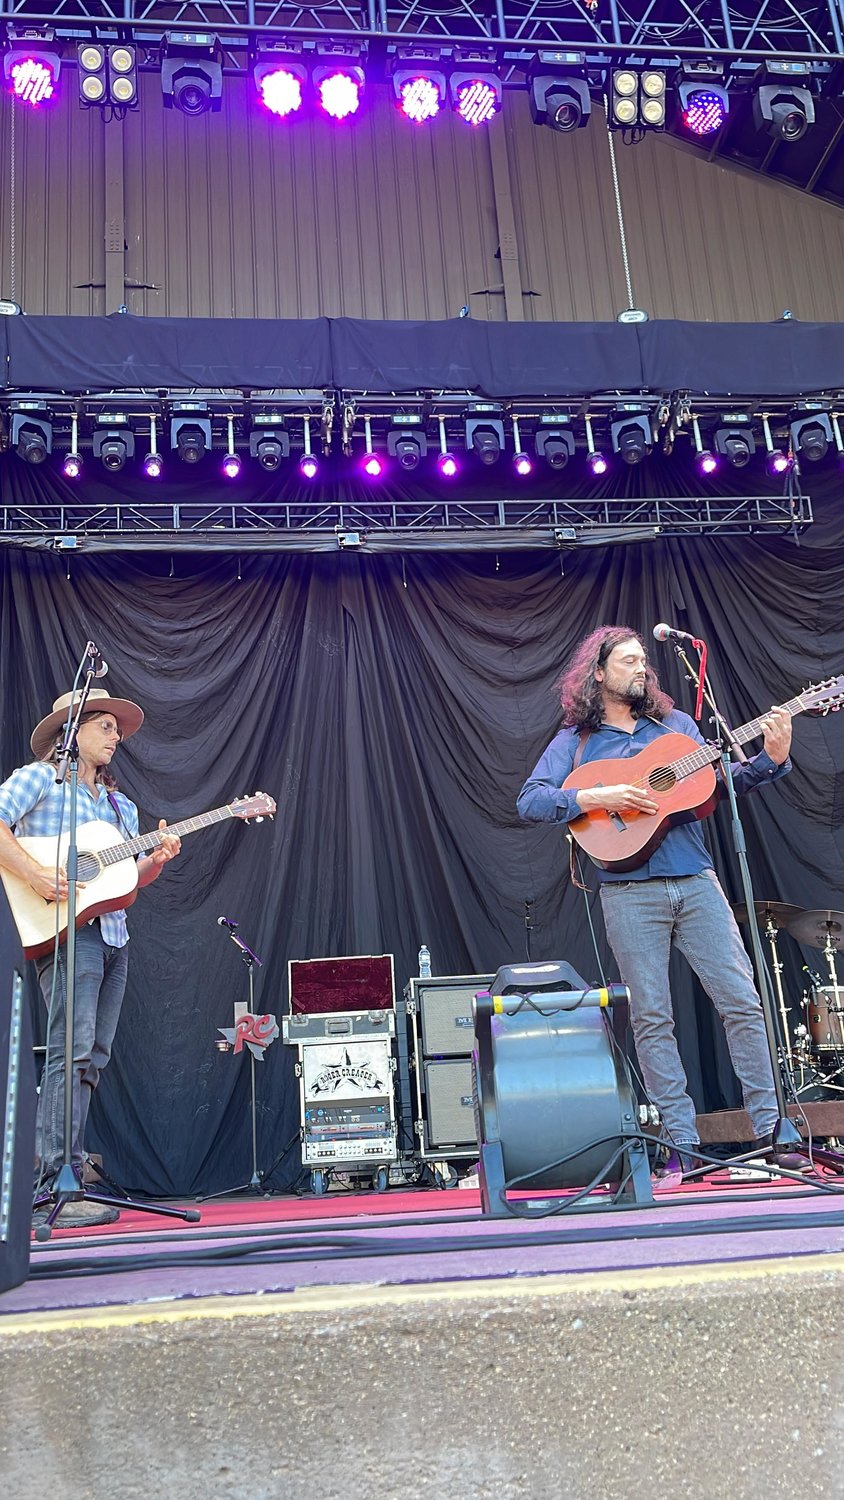 Lukas Nelson (left) joins Aaron Raitiere onstage to sing “Cold Soup,” an uplifting, melodic ballad from Raitiere’s album that the pair wrote together.